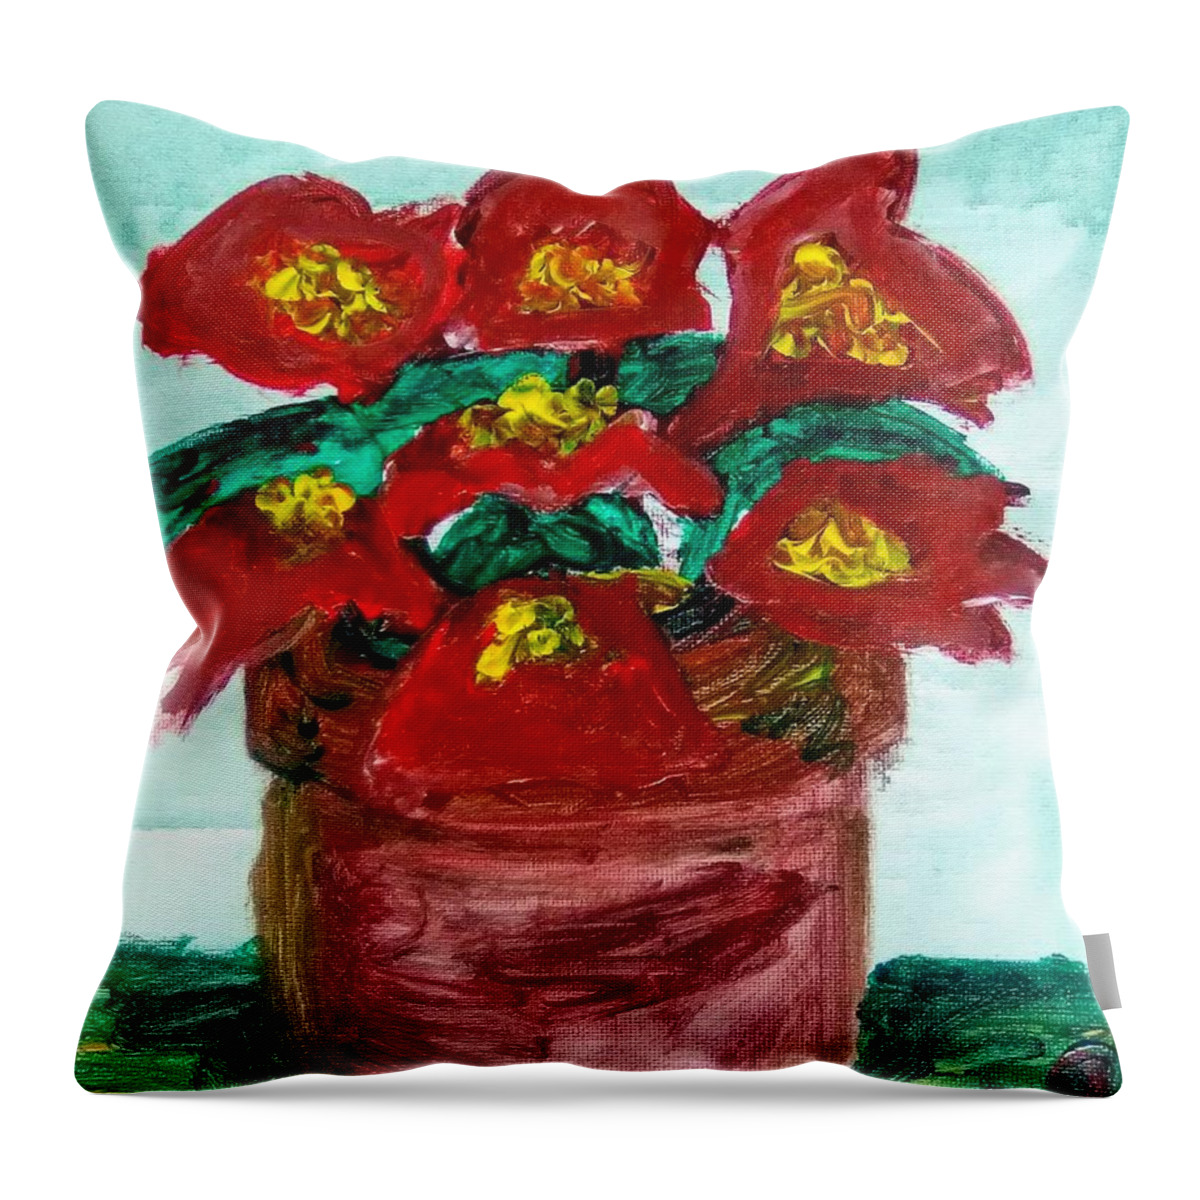 Poinsettias Throw Pillow featuring the painting Potted Poinsettias by Andrew Blitman